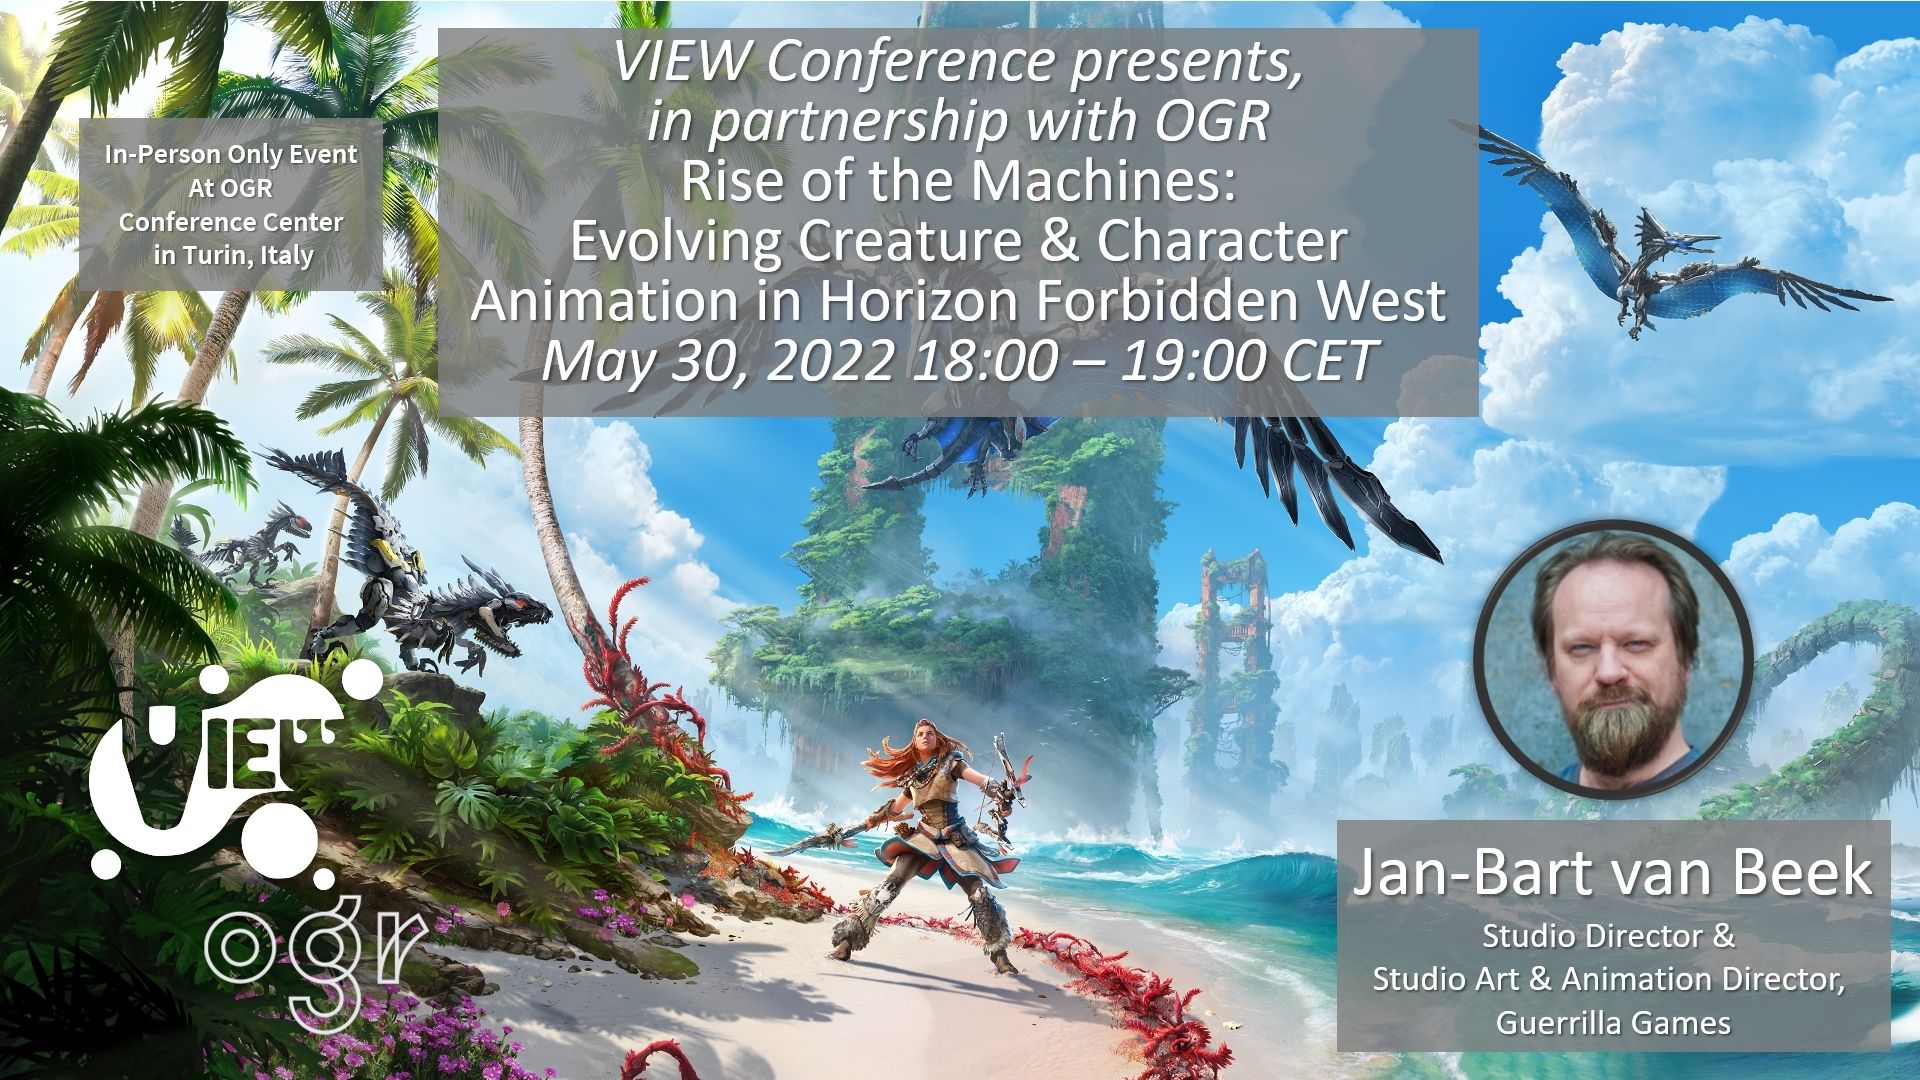 The Making of the Hit Action Role-Playing Game “Horizon Forbidden West” Exclusive Presentation by Guerilla Games for VIEW Conference